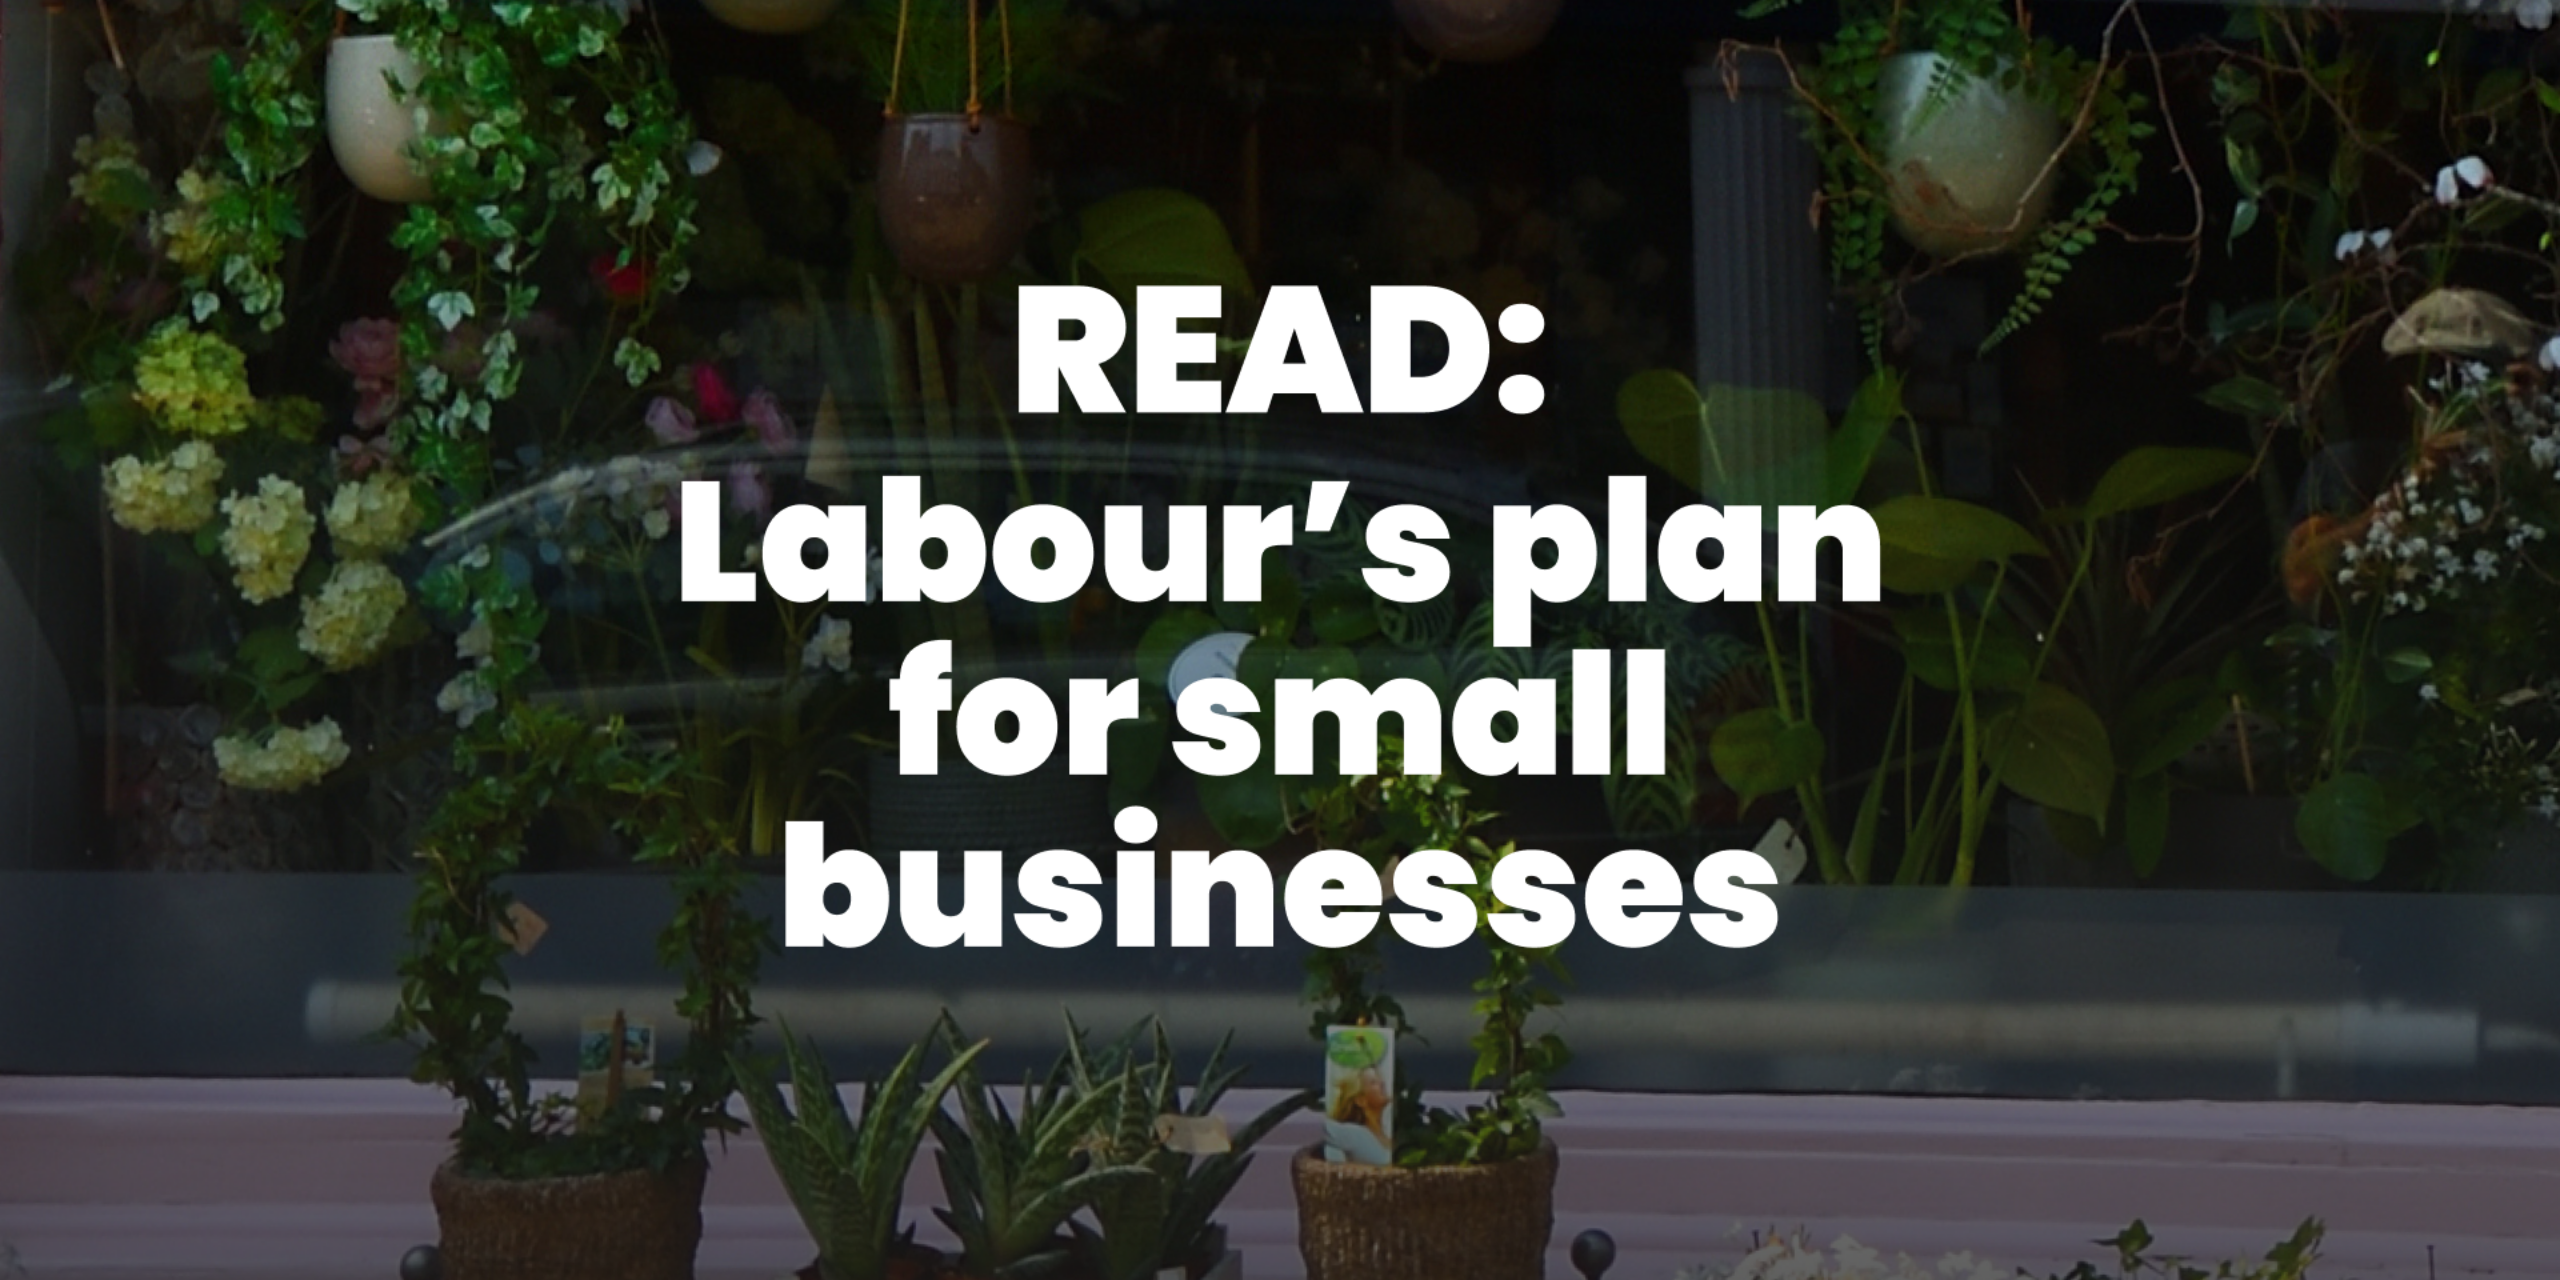 Labour plan for small businesses will pull up the shutters for Britain’s entrepreneurs